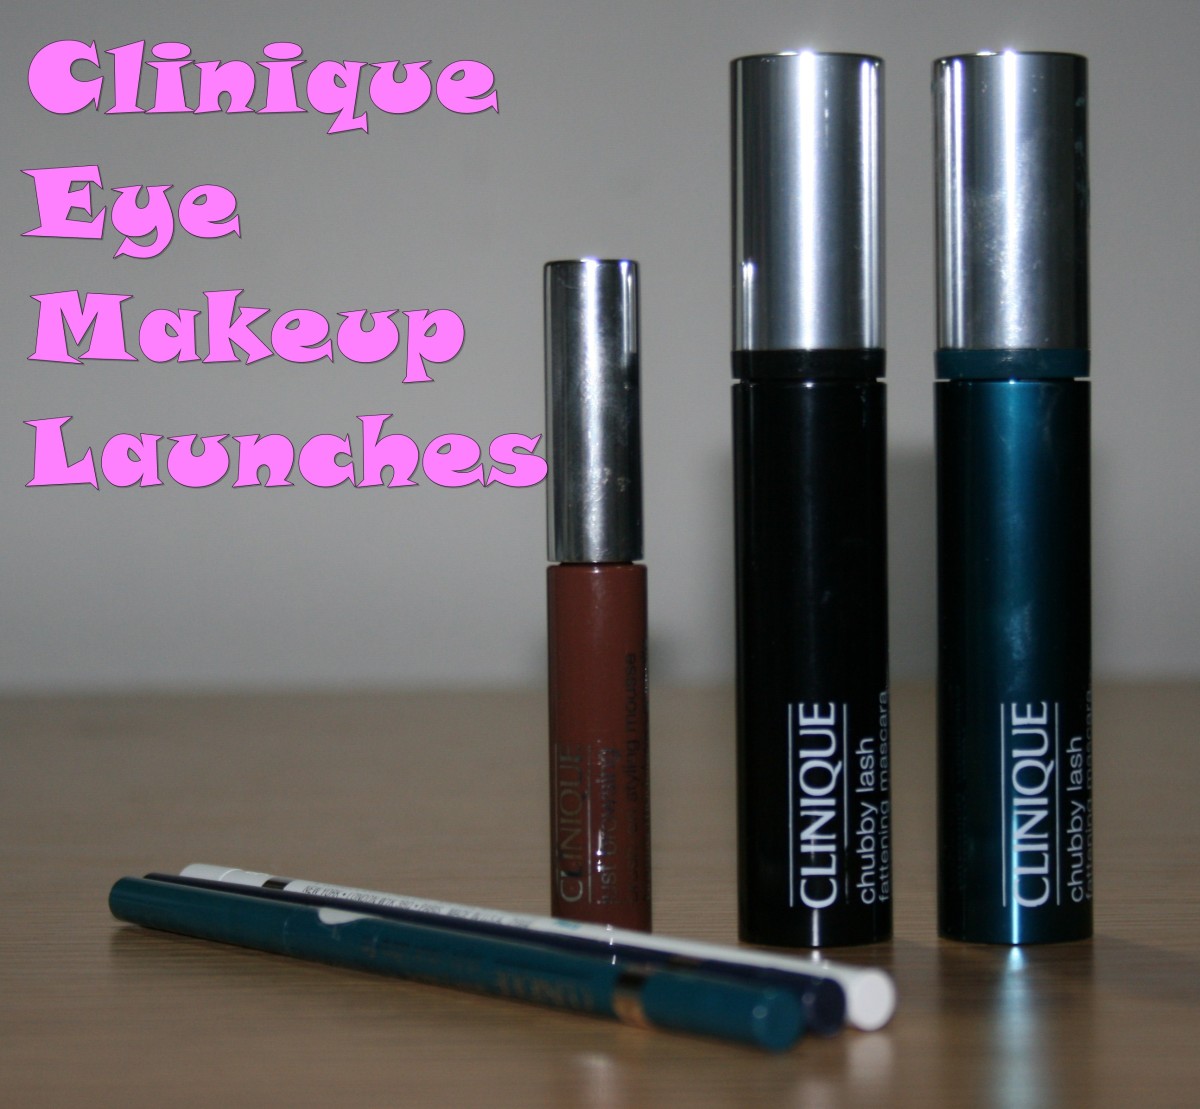 New Clinique Eye Makeup Launches